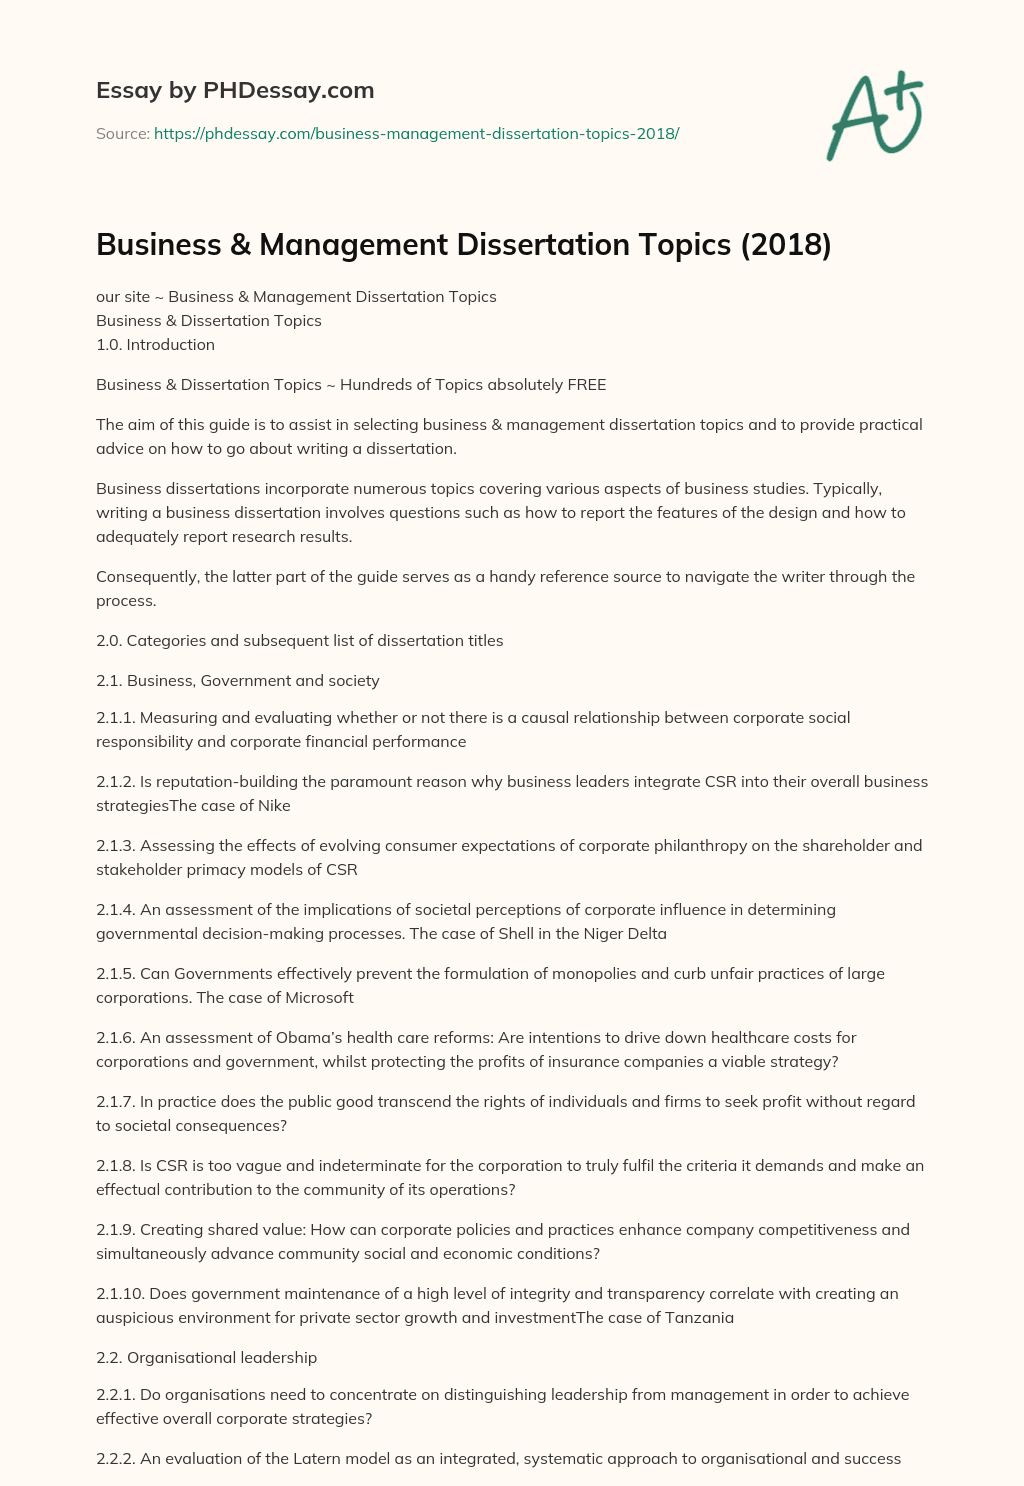 dissertation skills for business and management students pdf